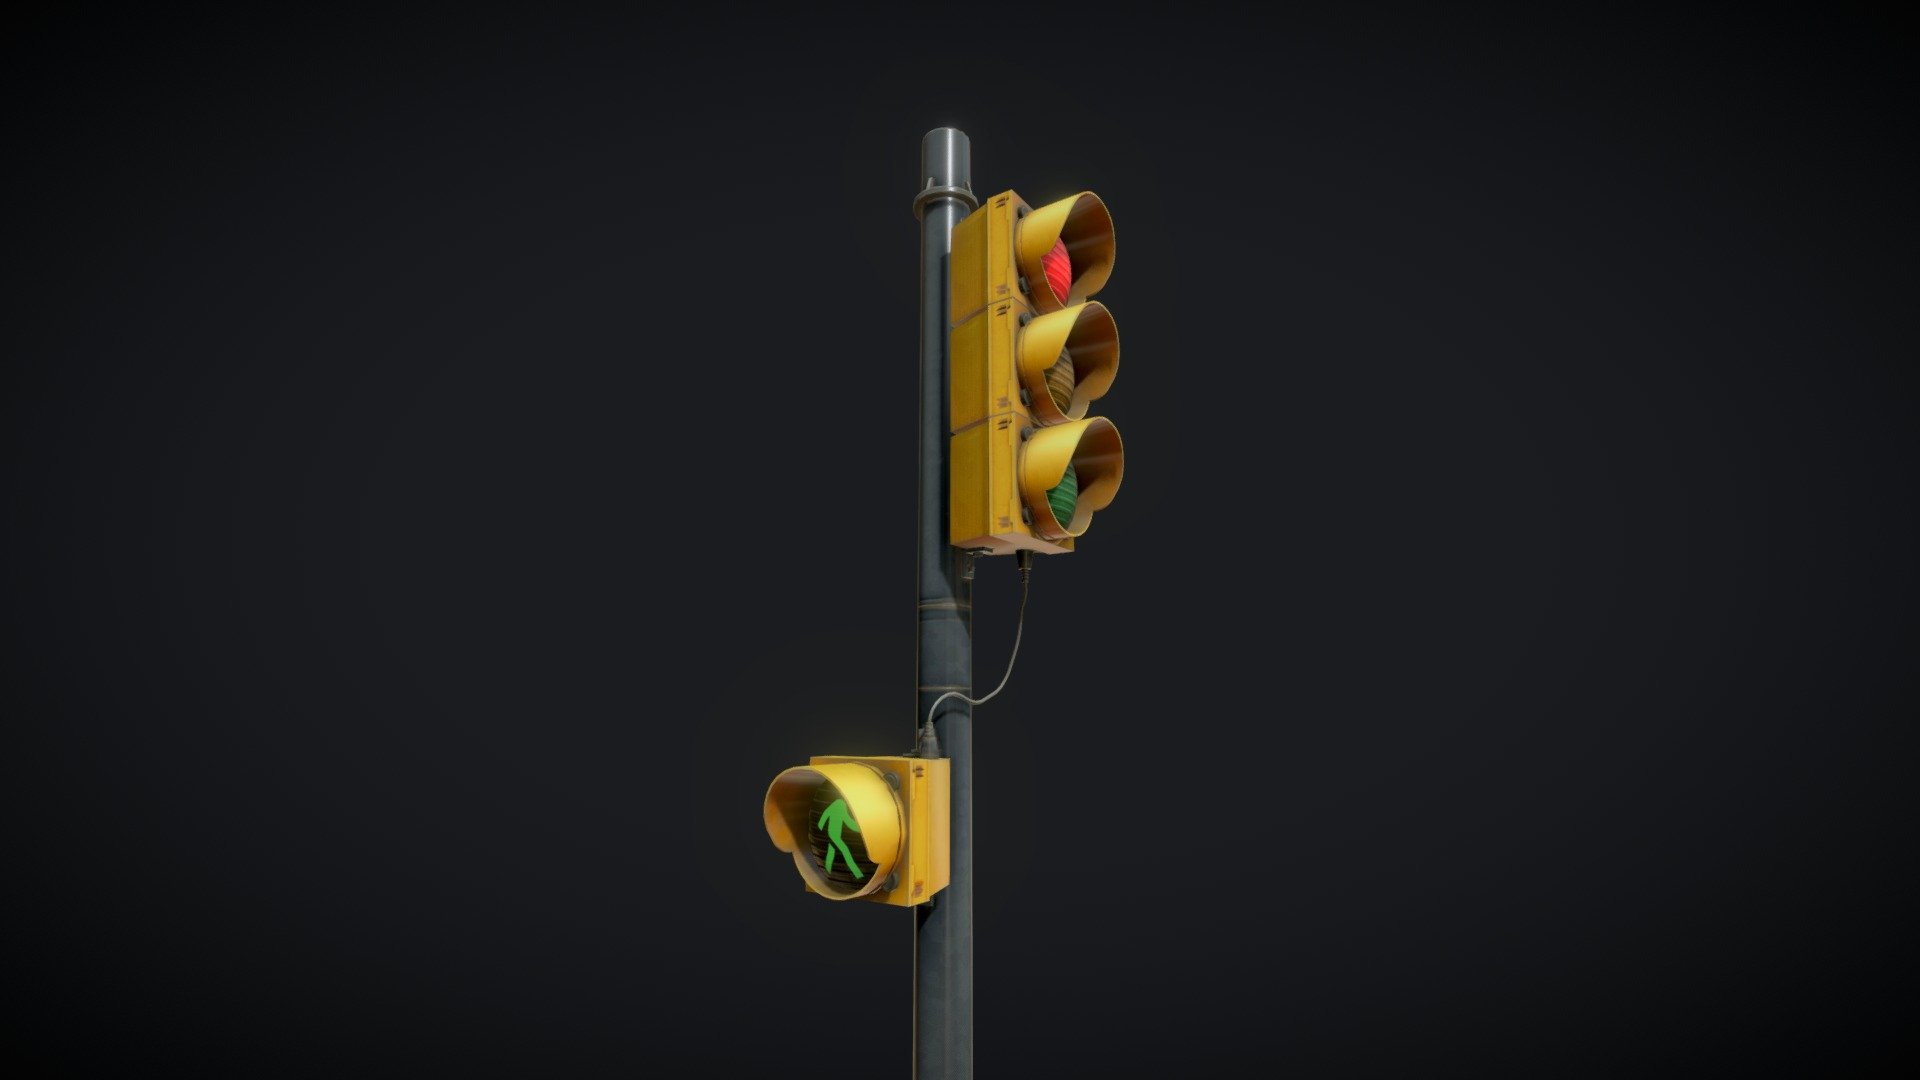 Stylized Traffic Light Game Ready. 

Modeled from Blender and textured Susbtance Pianter 3d model